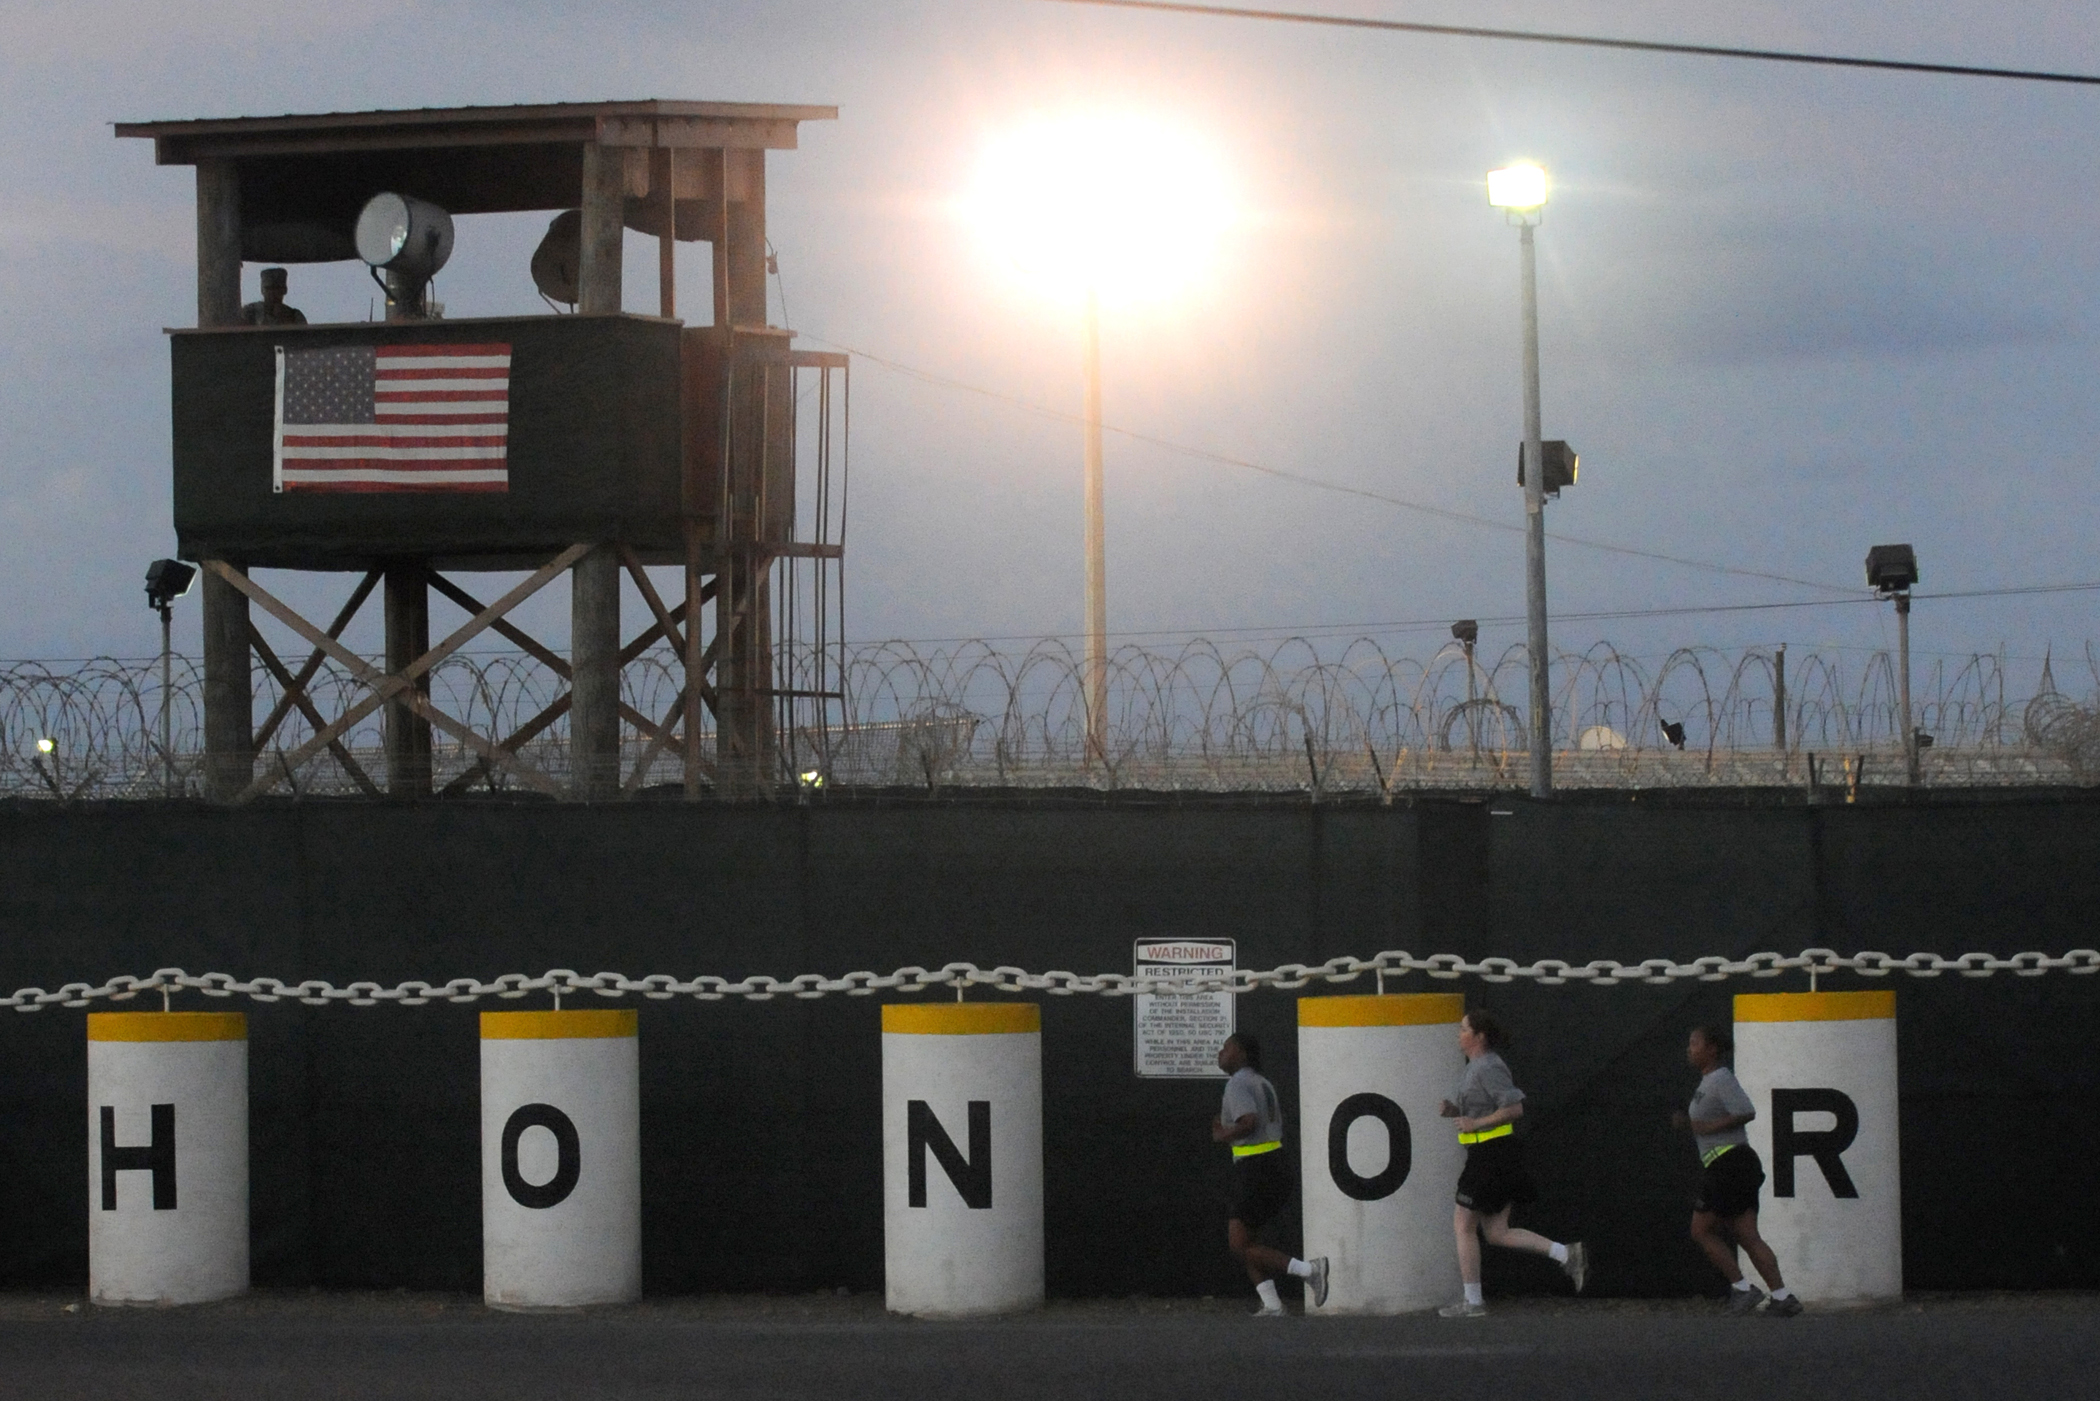 The Best Way to Close Guantanamo? Give It Back to Cuba.